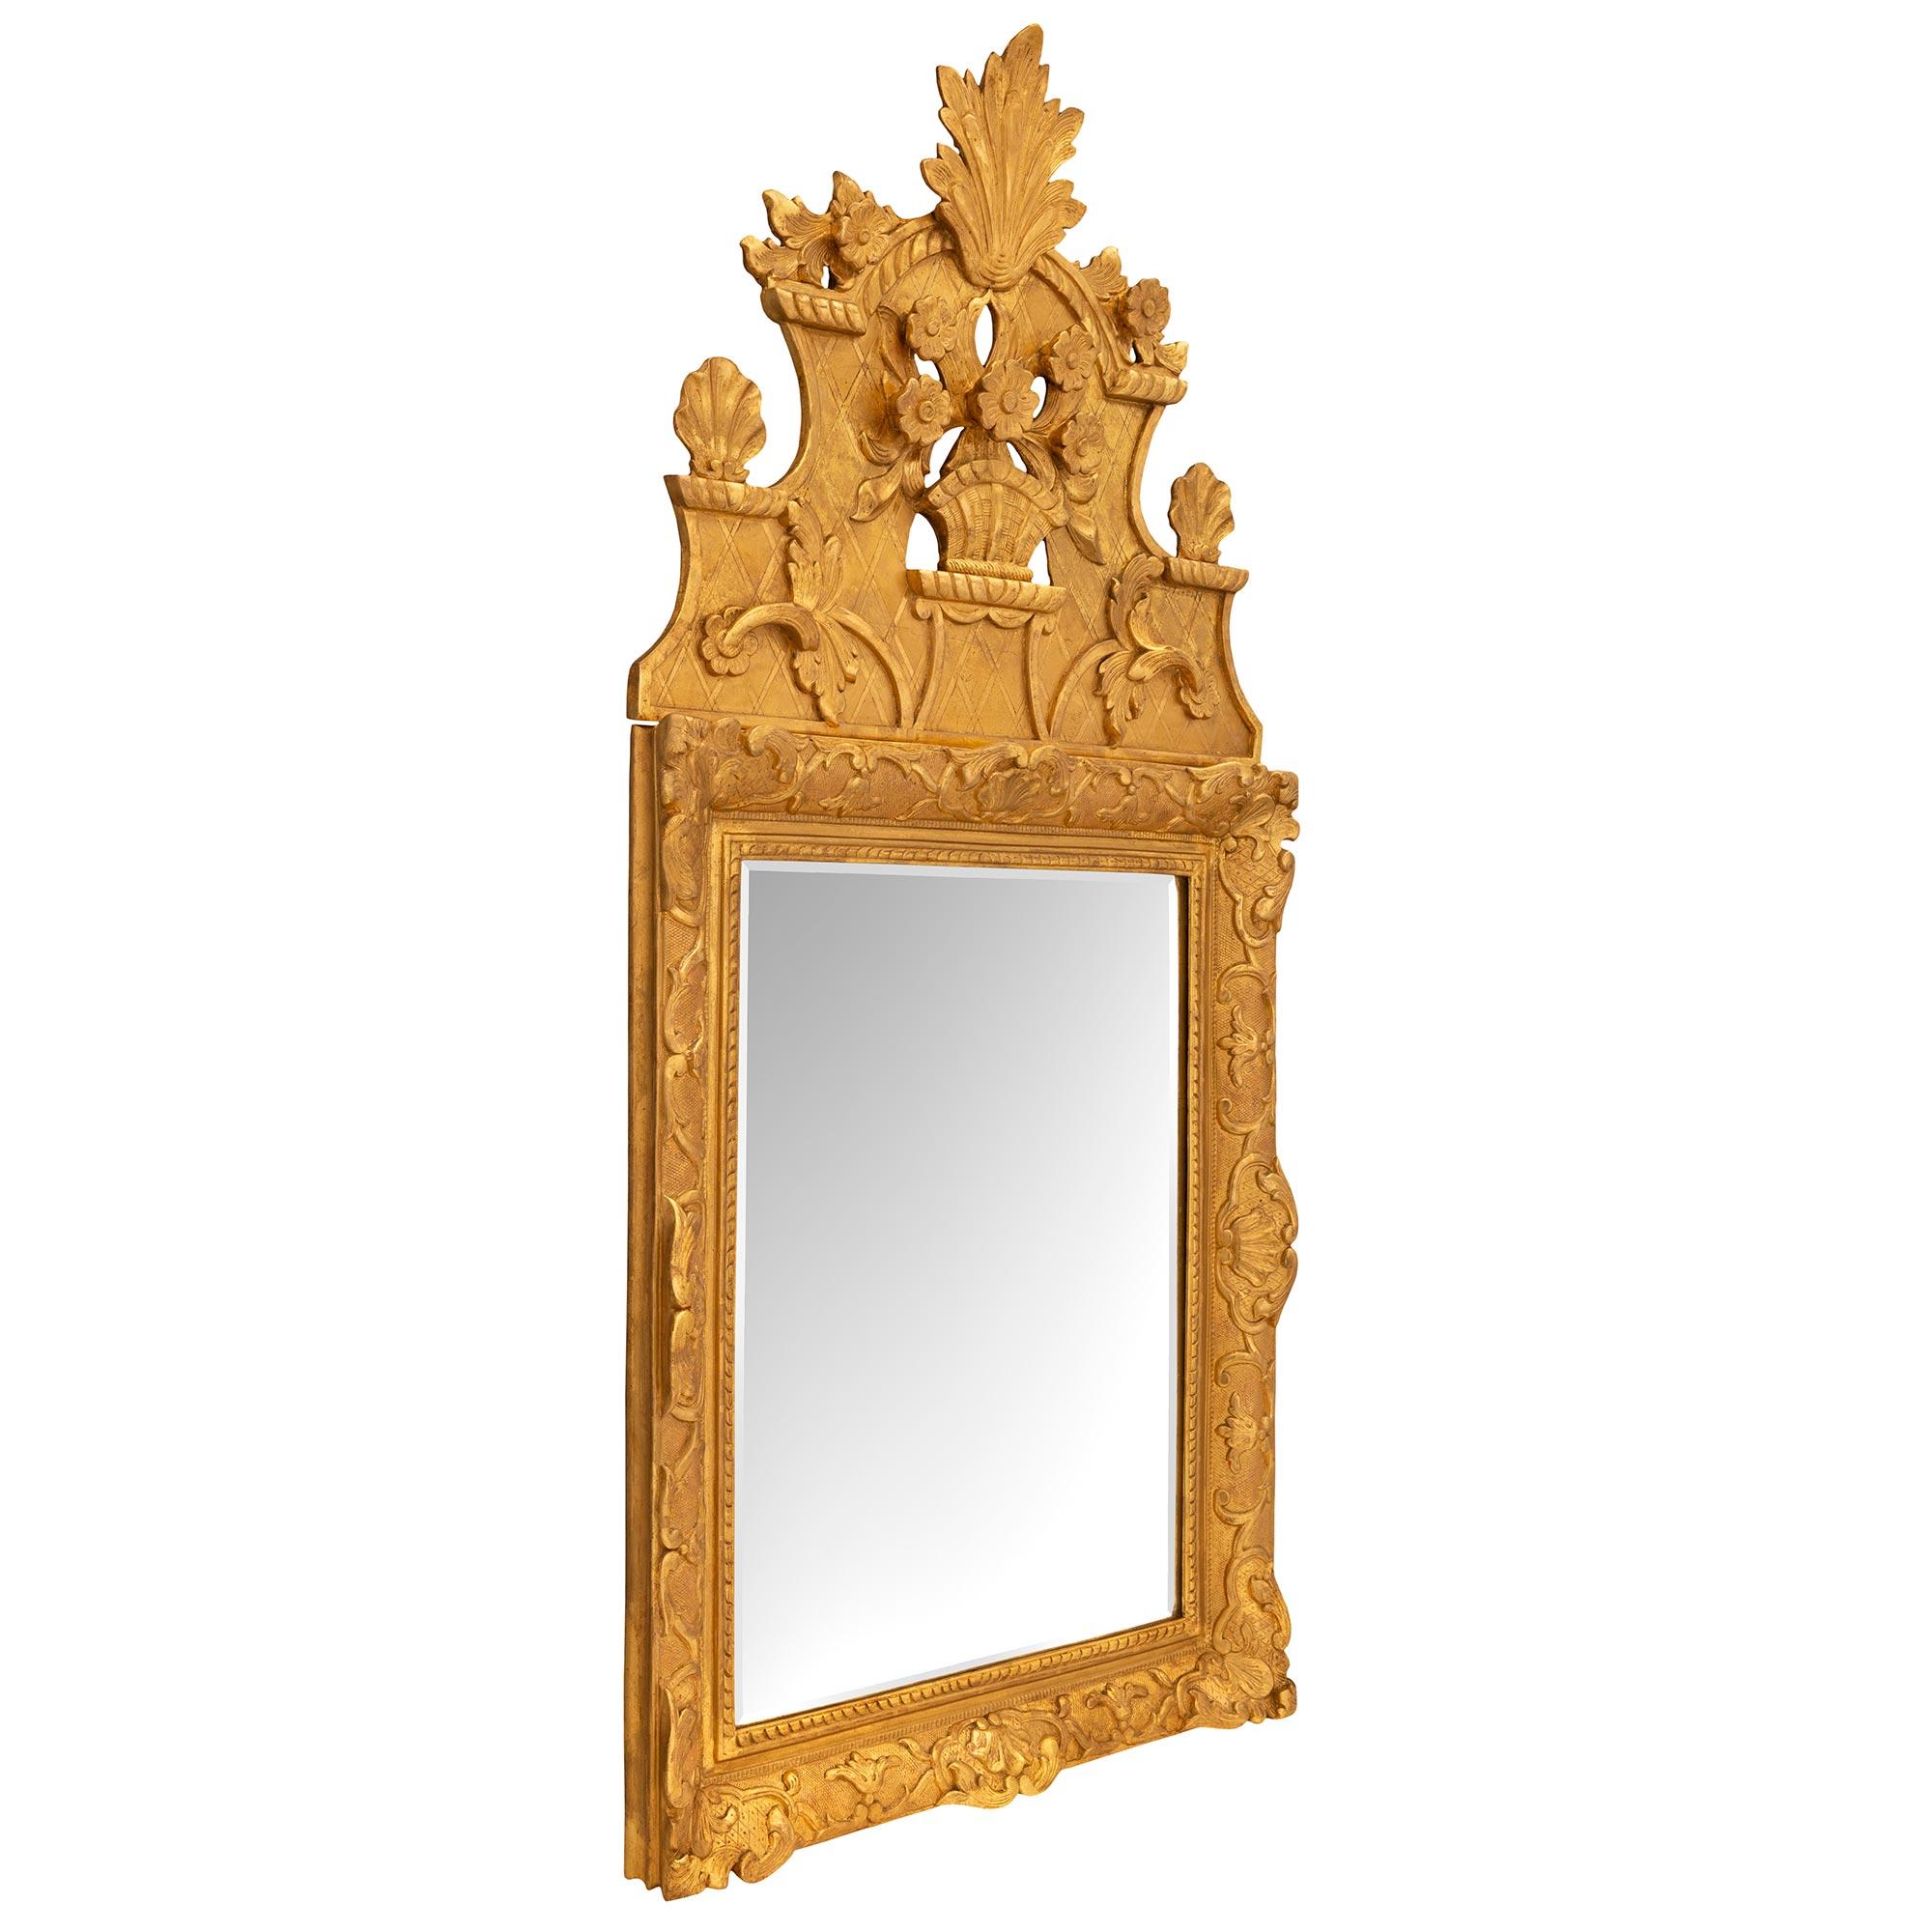 A beautiful French 18th century Regence period giltwood mirror. The mirror retains its original beveled mirror plate set within an elegant mottled and twisted ribbon border. The frame displays superb richly carved scrolled foliate designs set on an